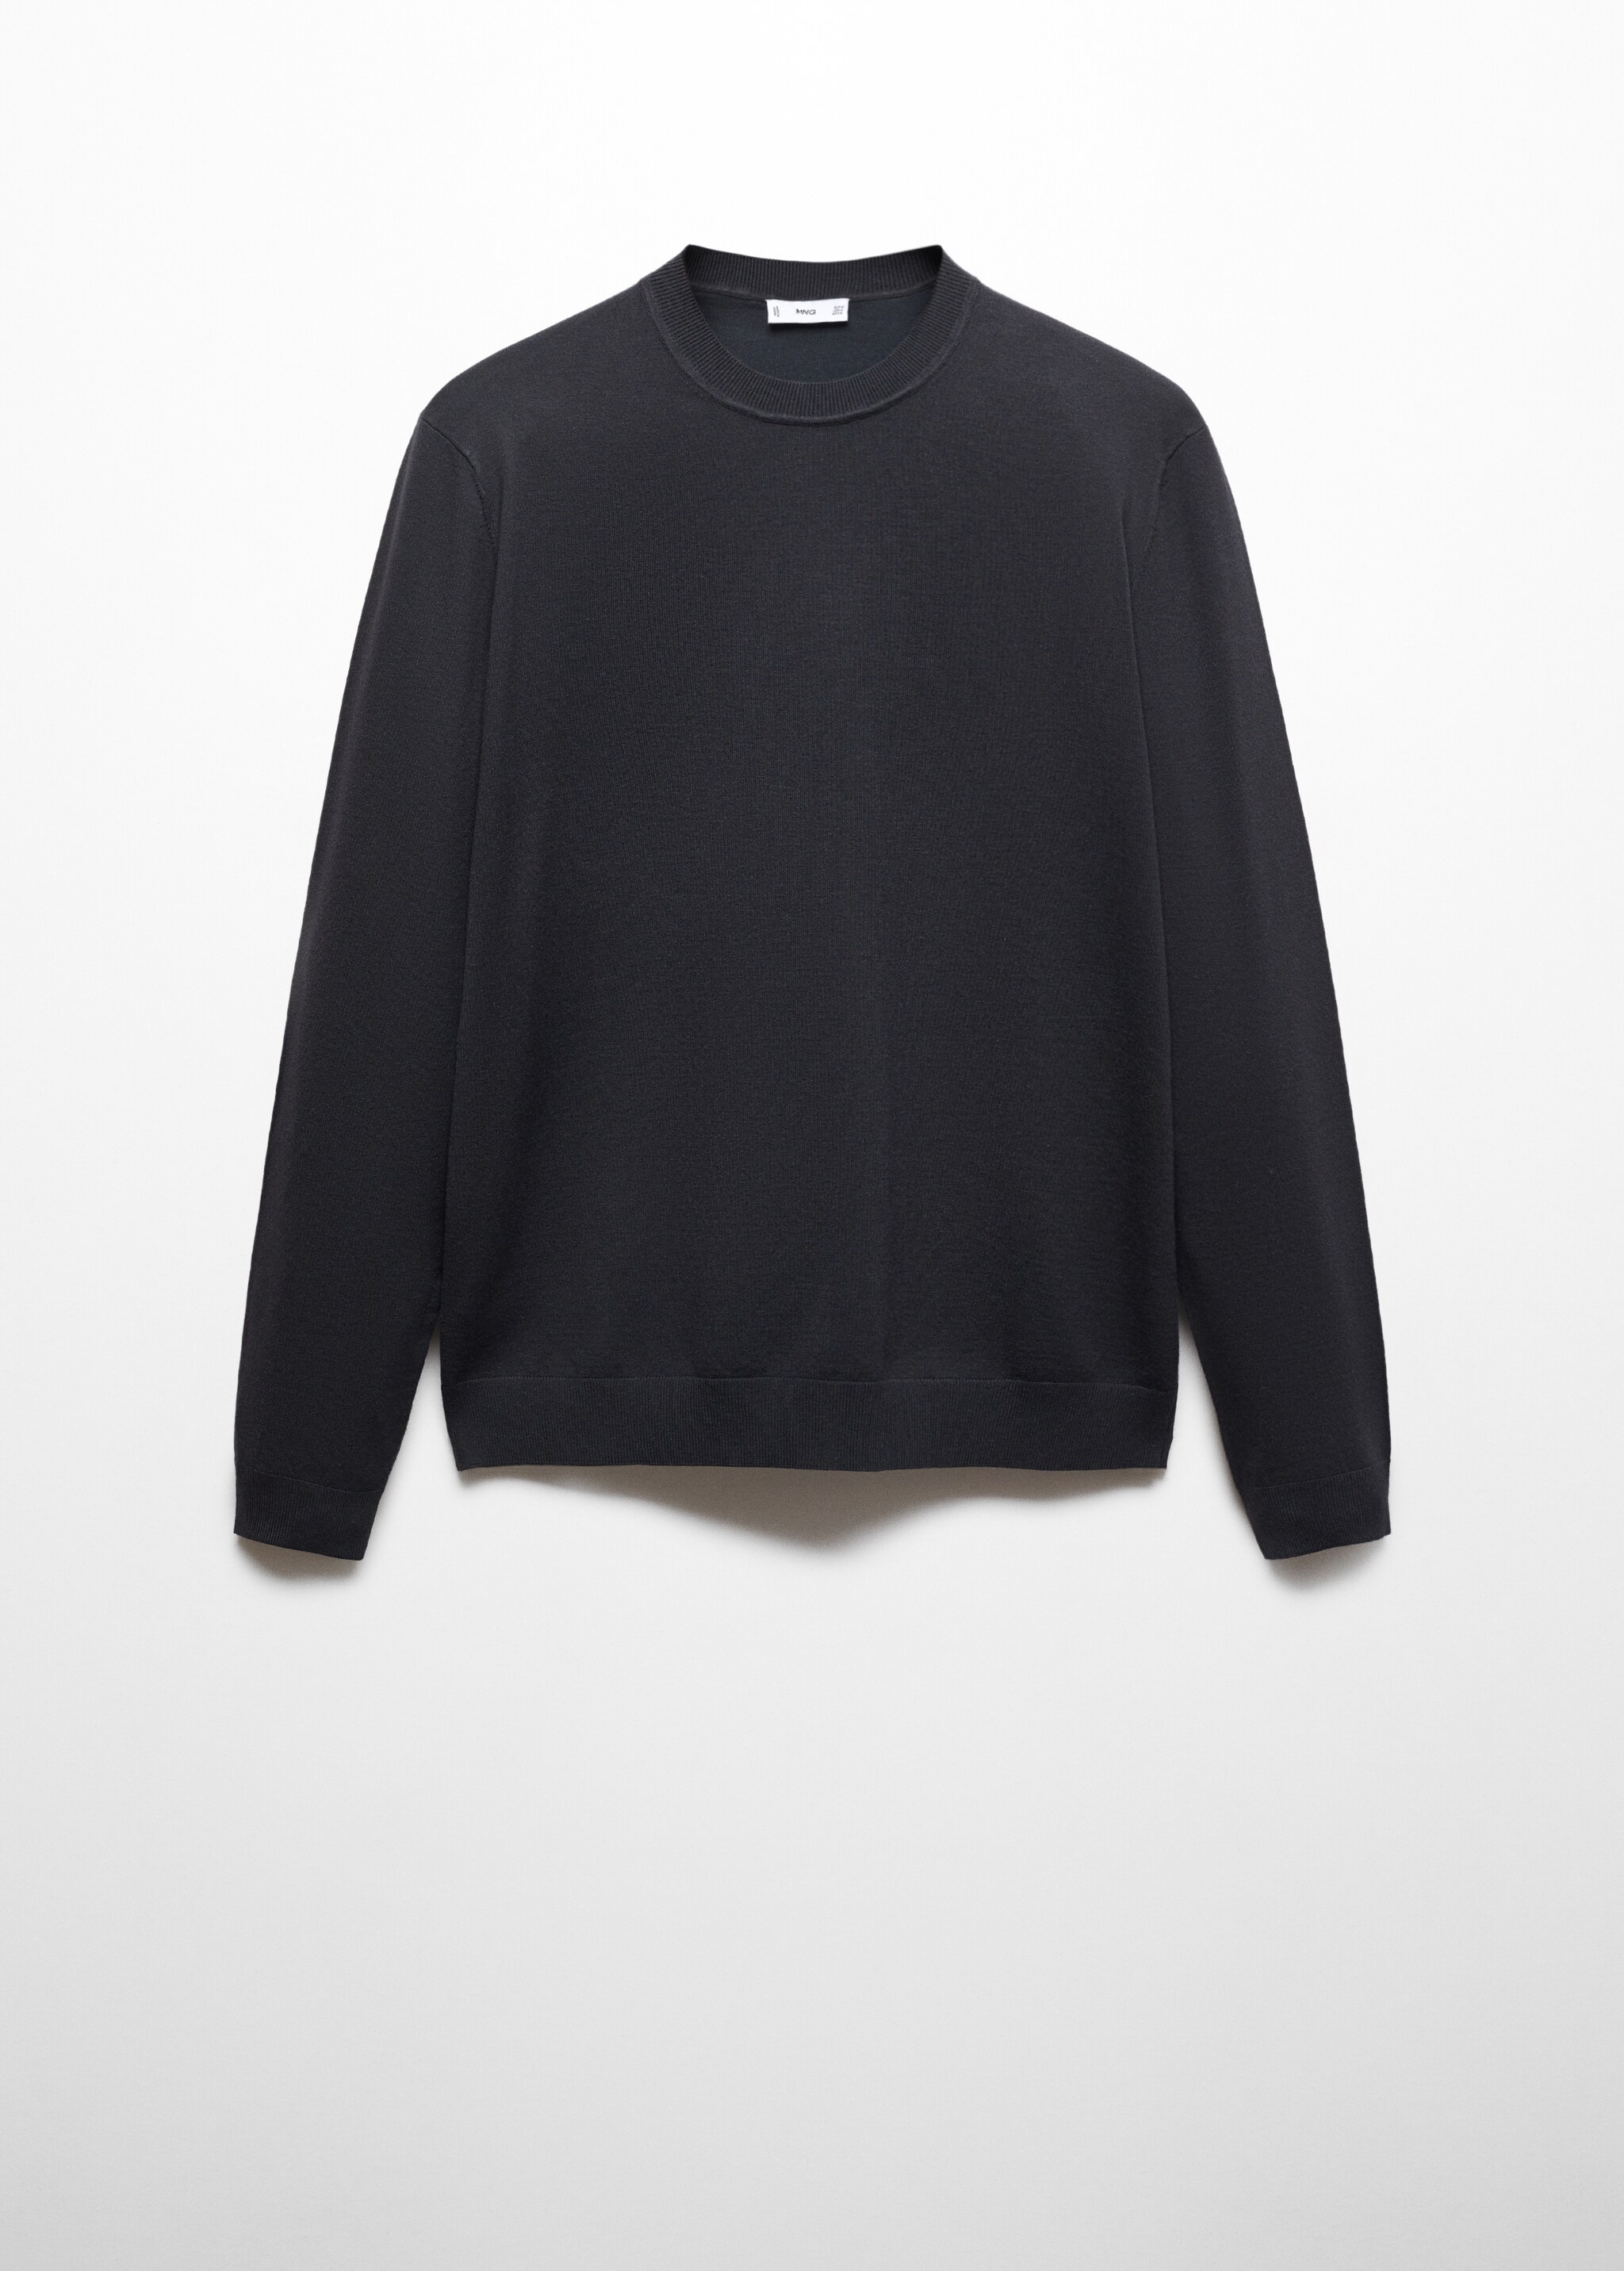 Round neck cotton knit sweater - Article without model